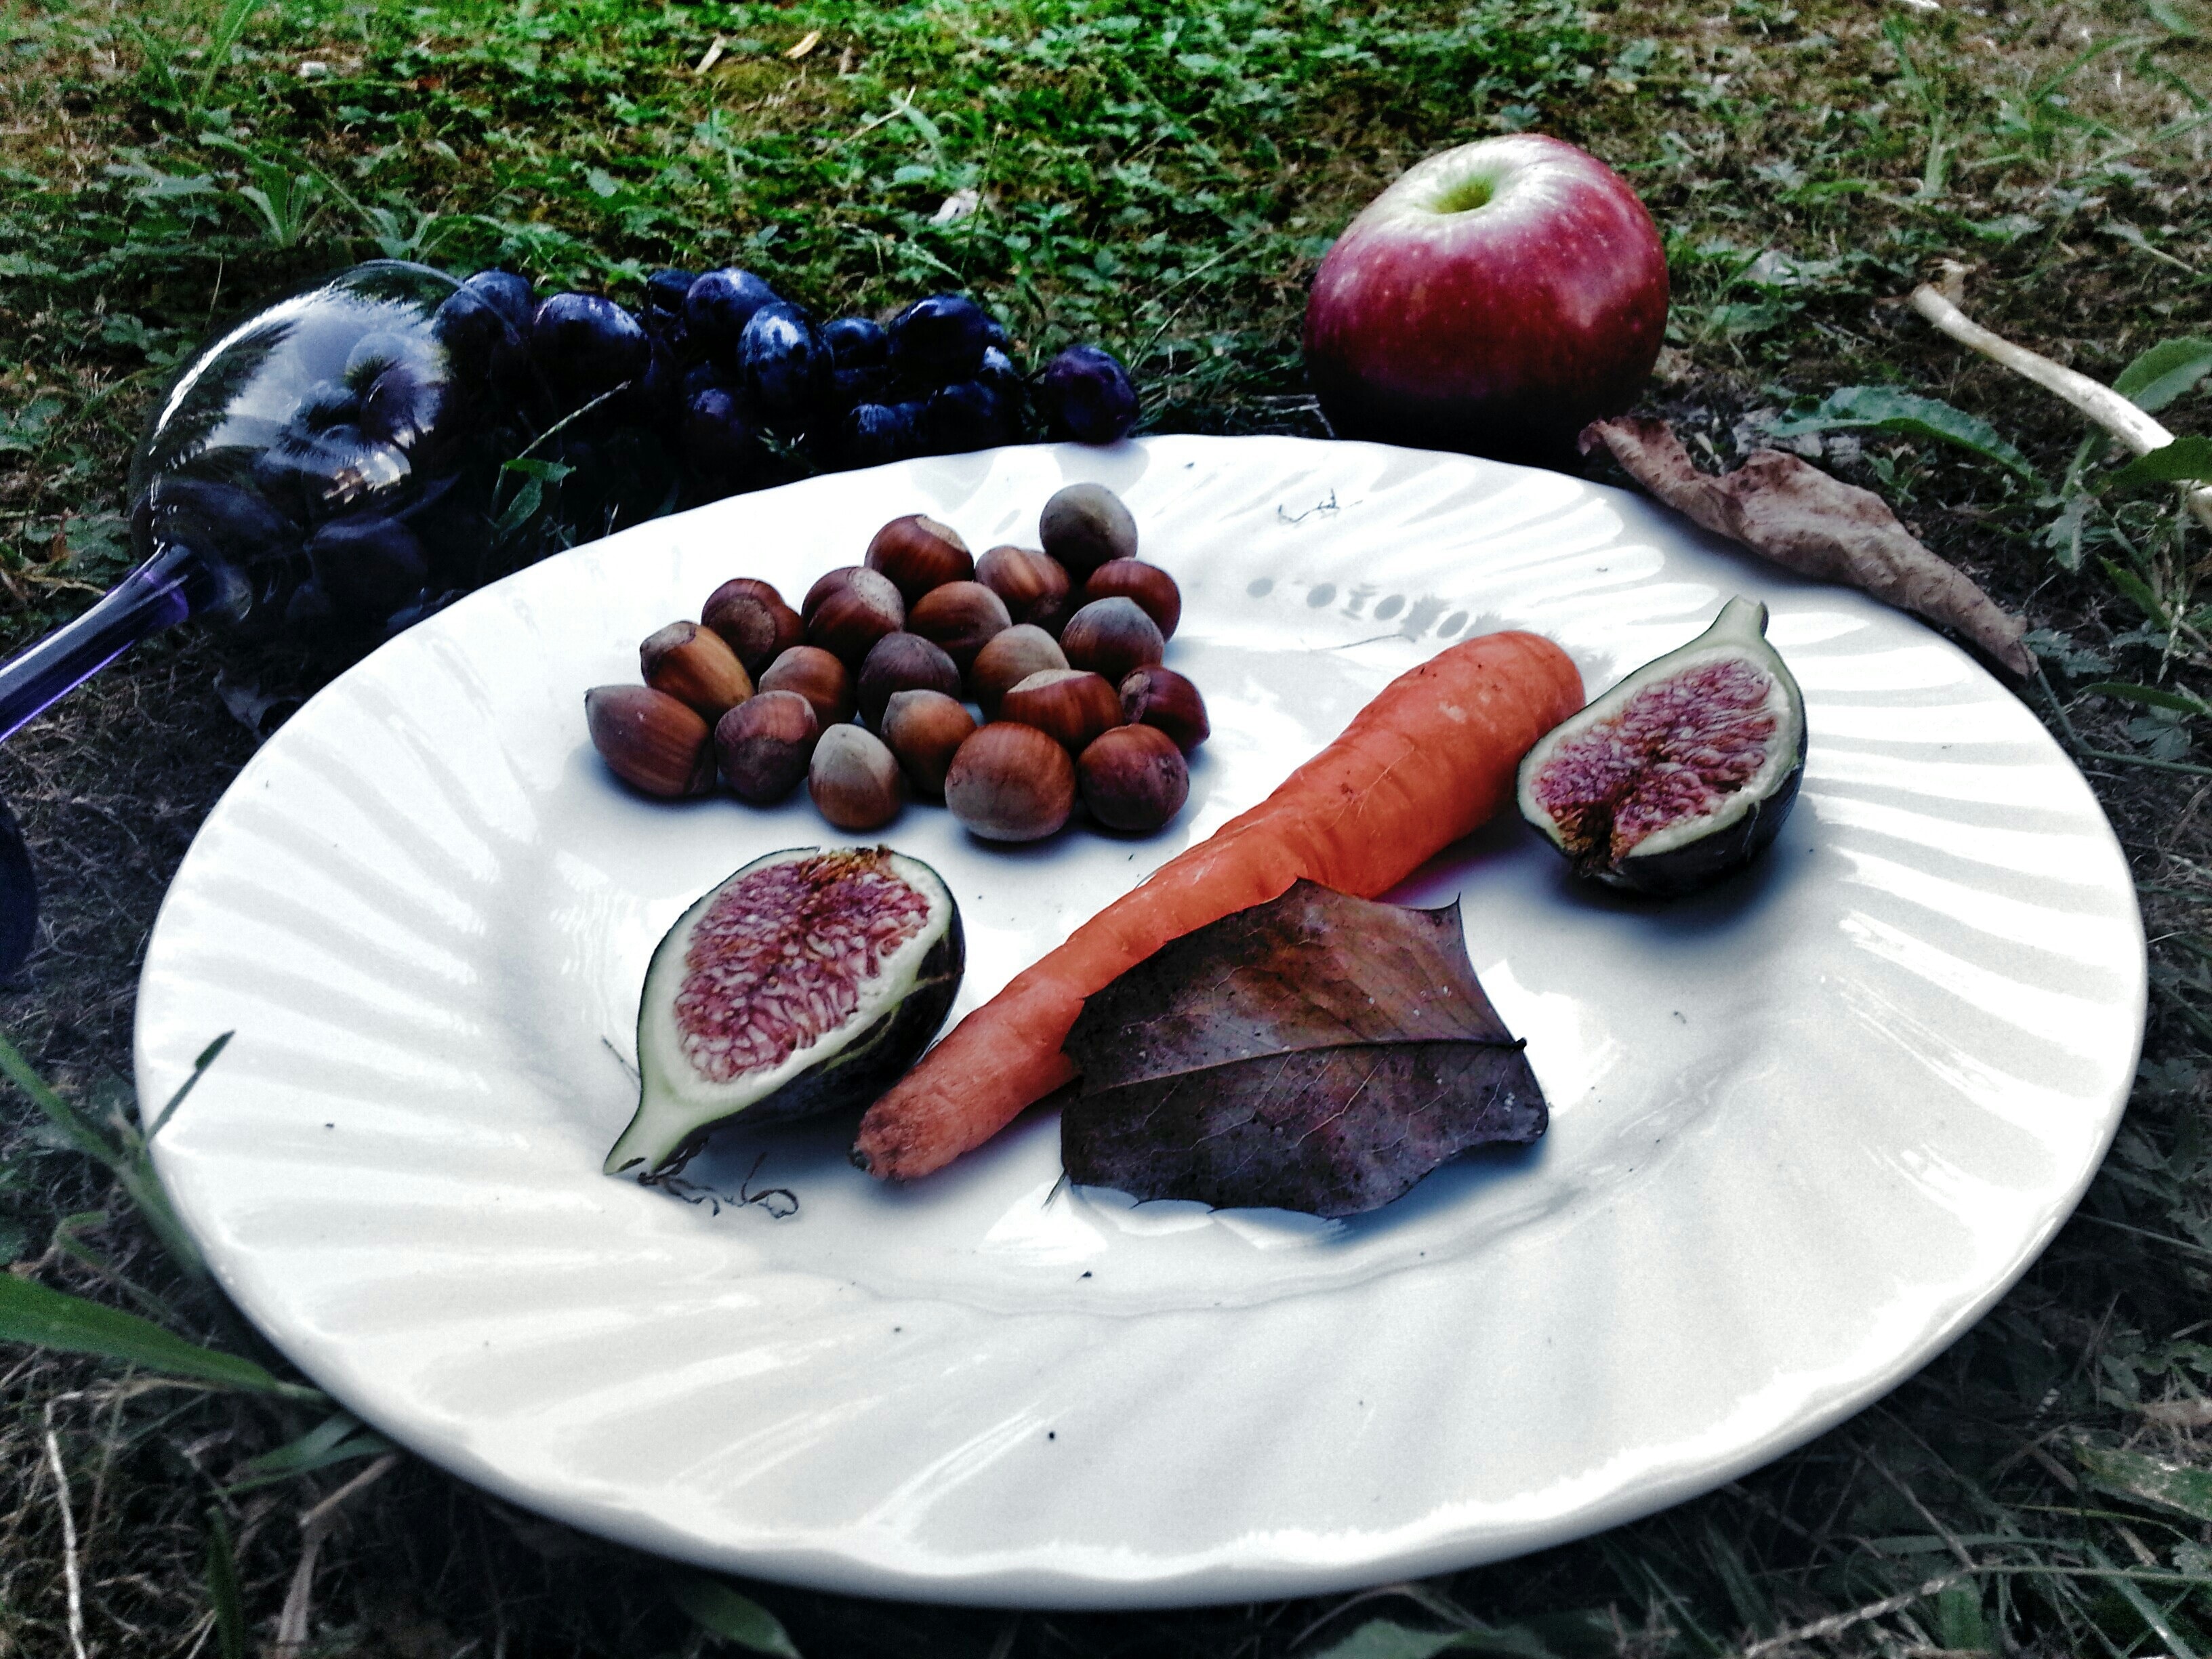 assorted vegetables and fruits on the plate with dark lighting